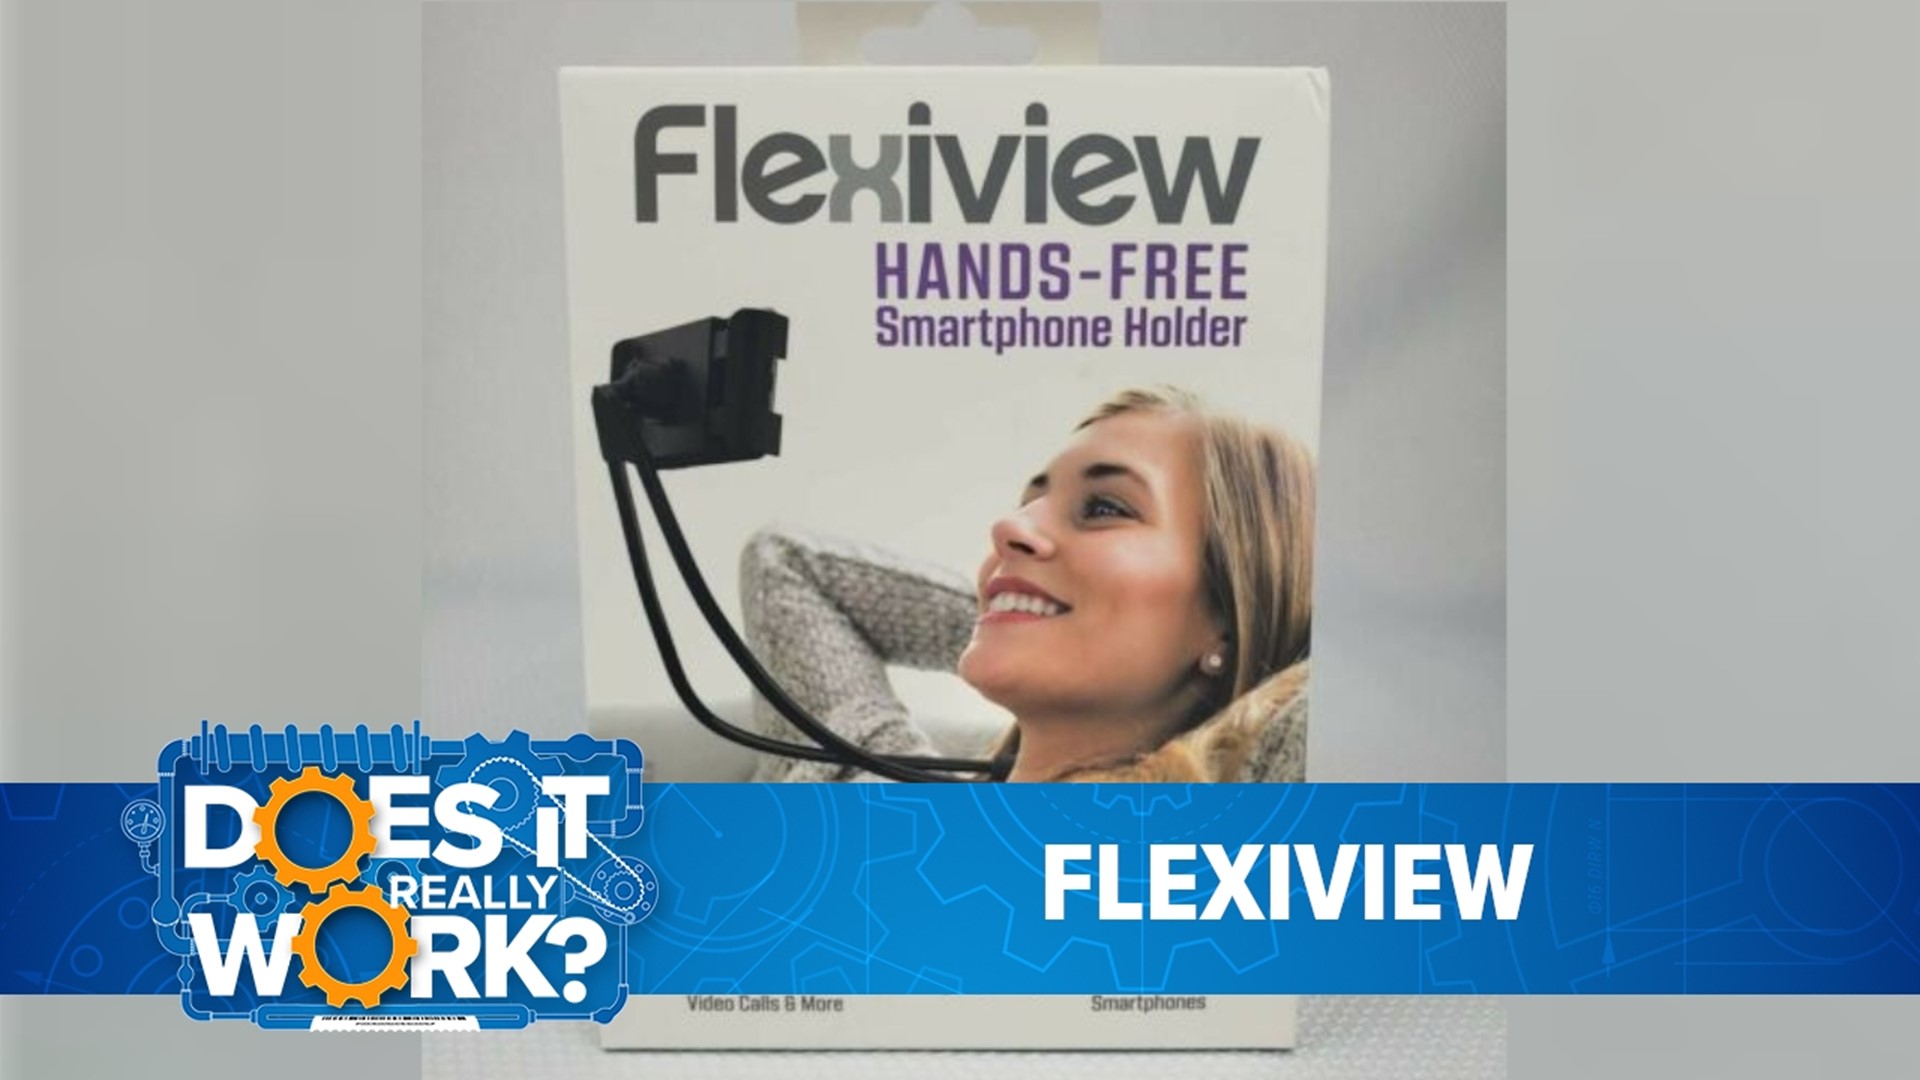 The Flexiview phone holder allows you to use your phone while keeping your hands free to do other things.